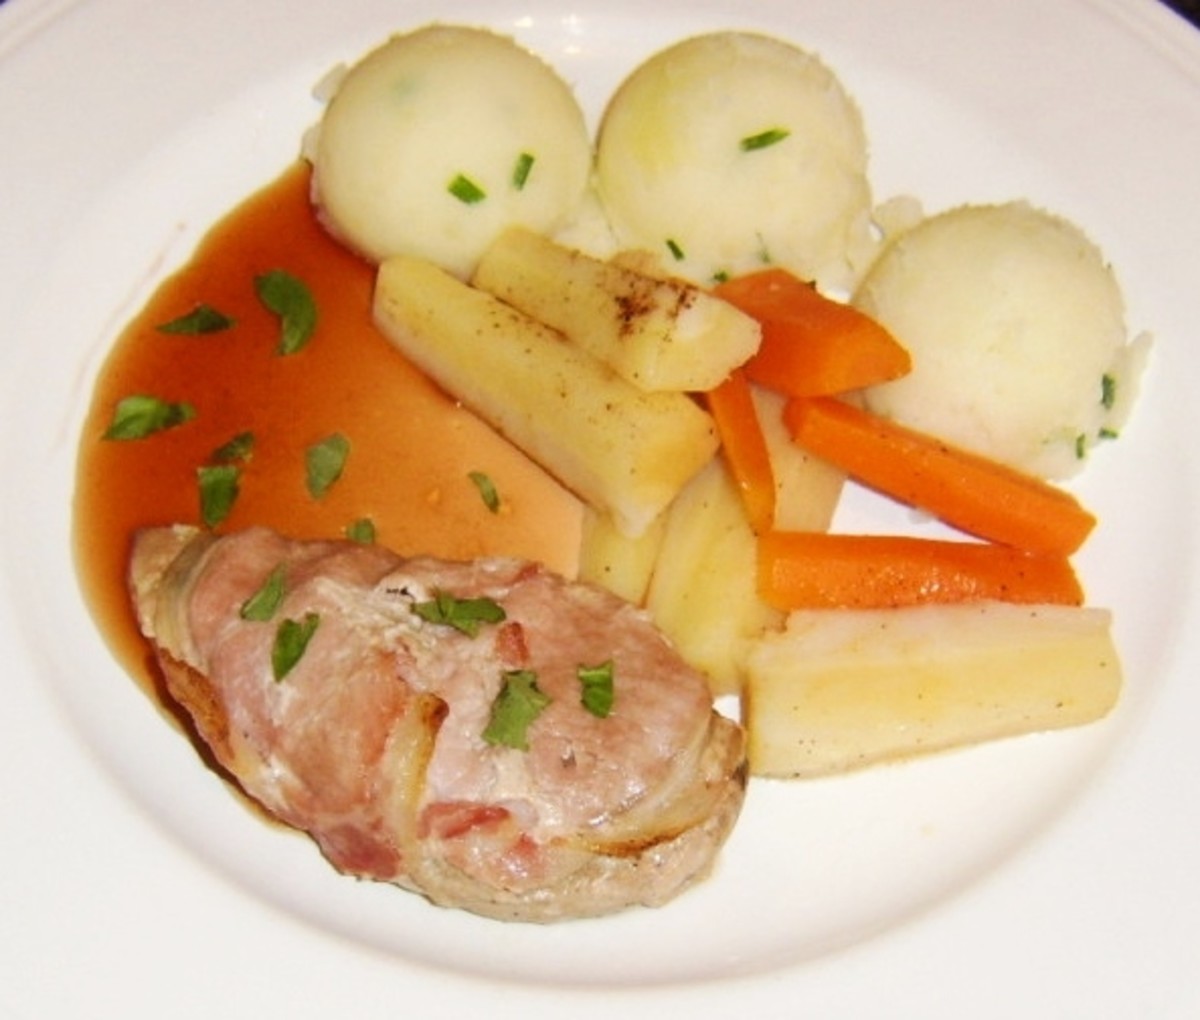 Pheasant breast is cooked wrapped in bacon and served with vegetables and a redcurrant and cider sauce